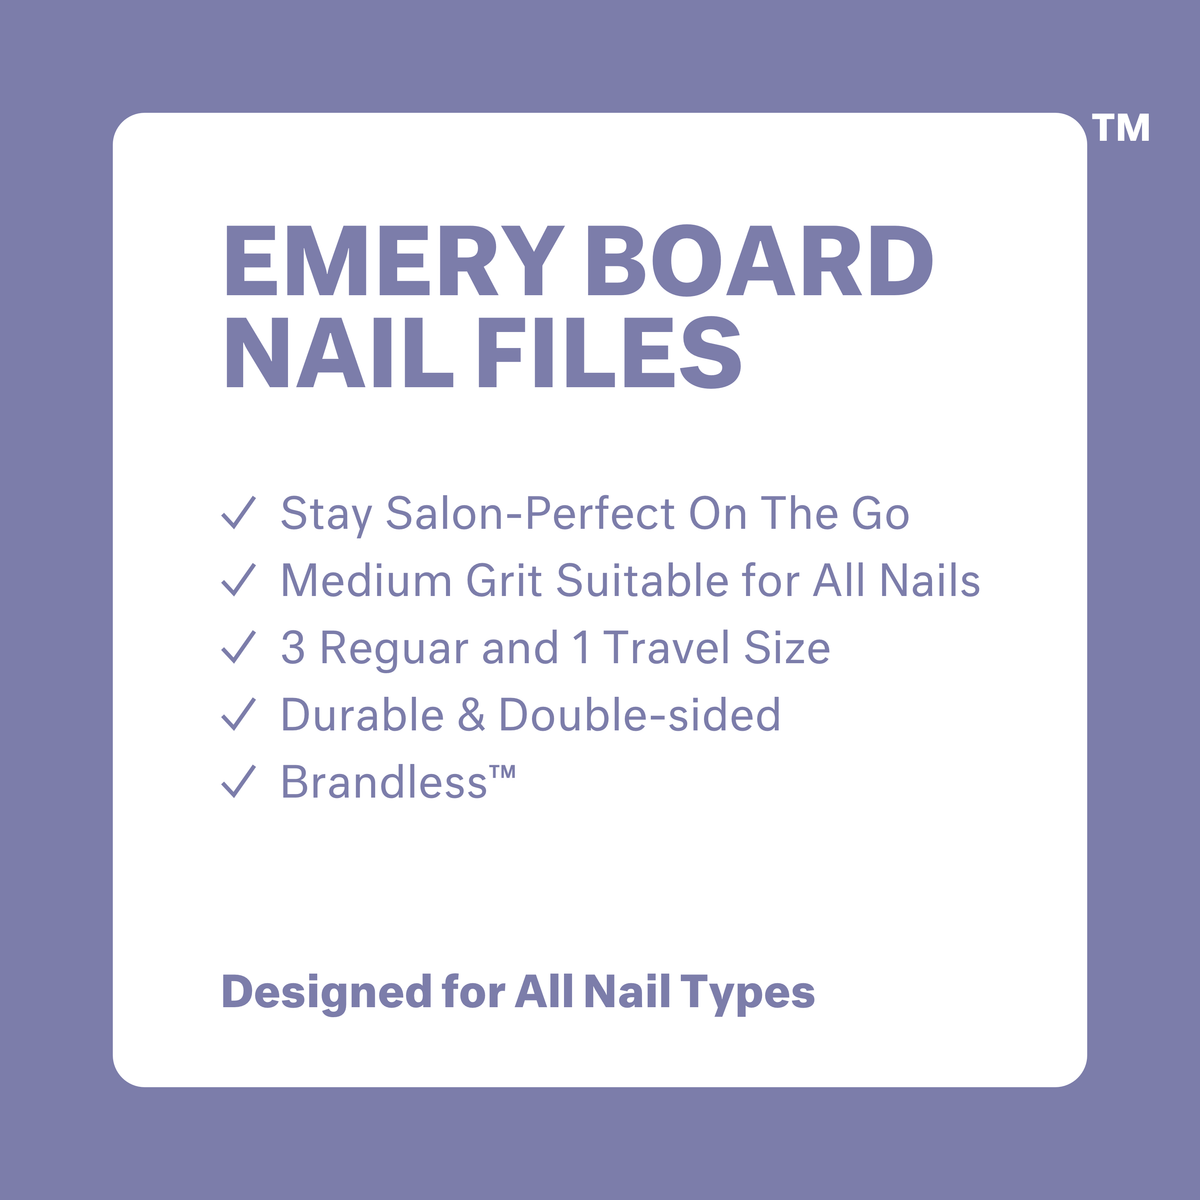 Emery Board Nail Files: stay salon-perfect on the go, medium grit suitable for all nails, 3 regular and 1 travel size, durable and double-sided. Brandless. Designed for all nail types.